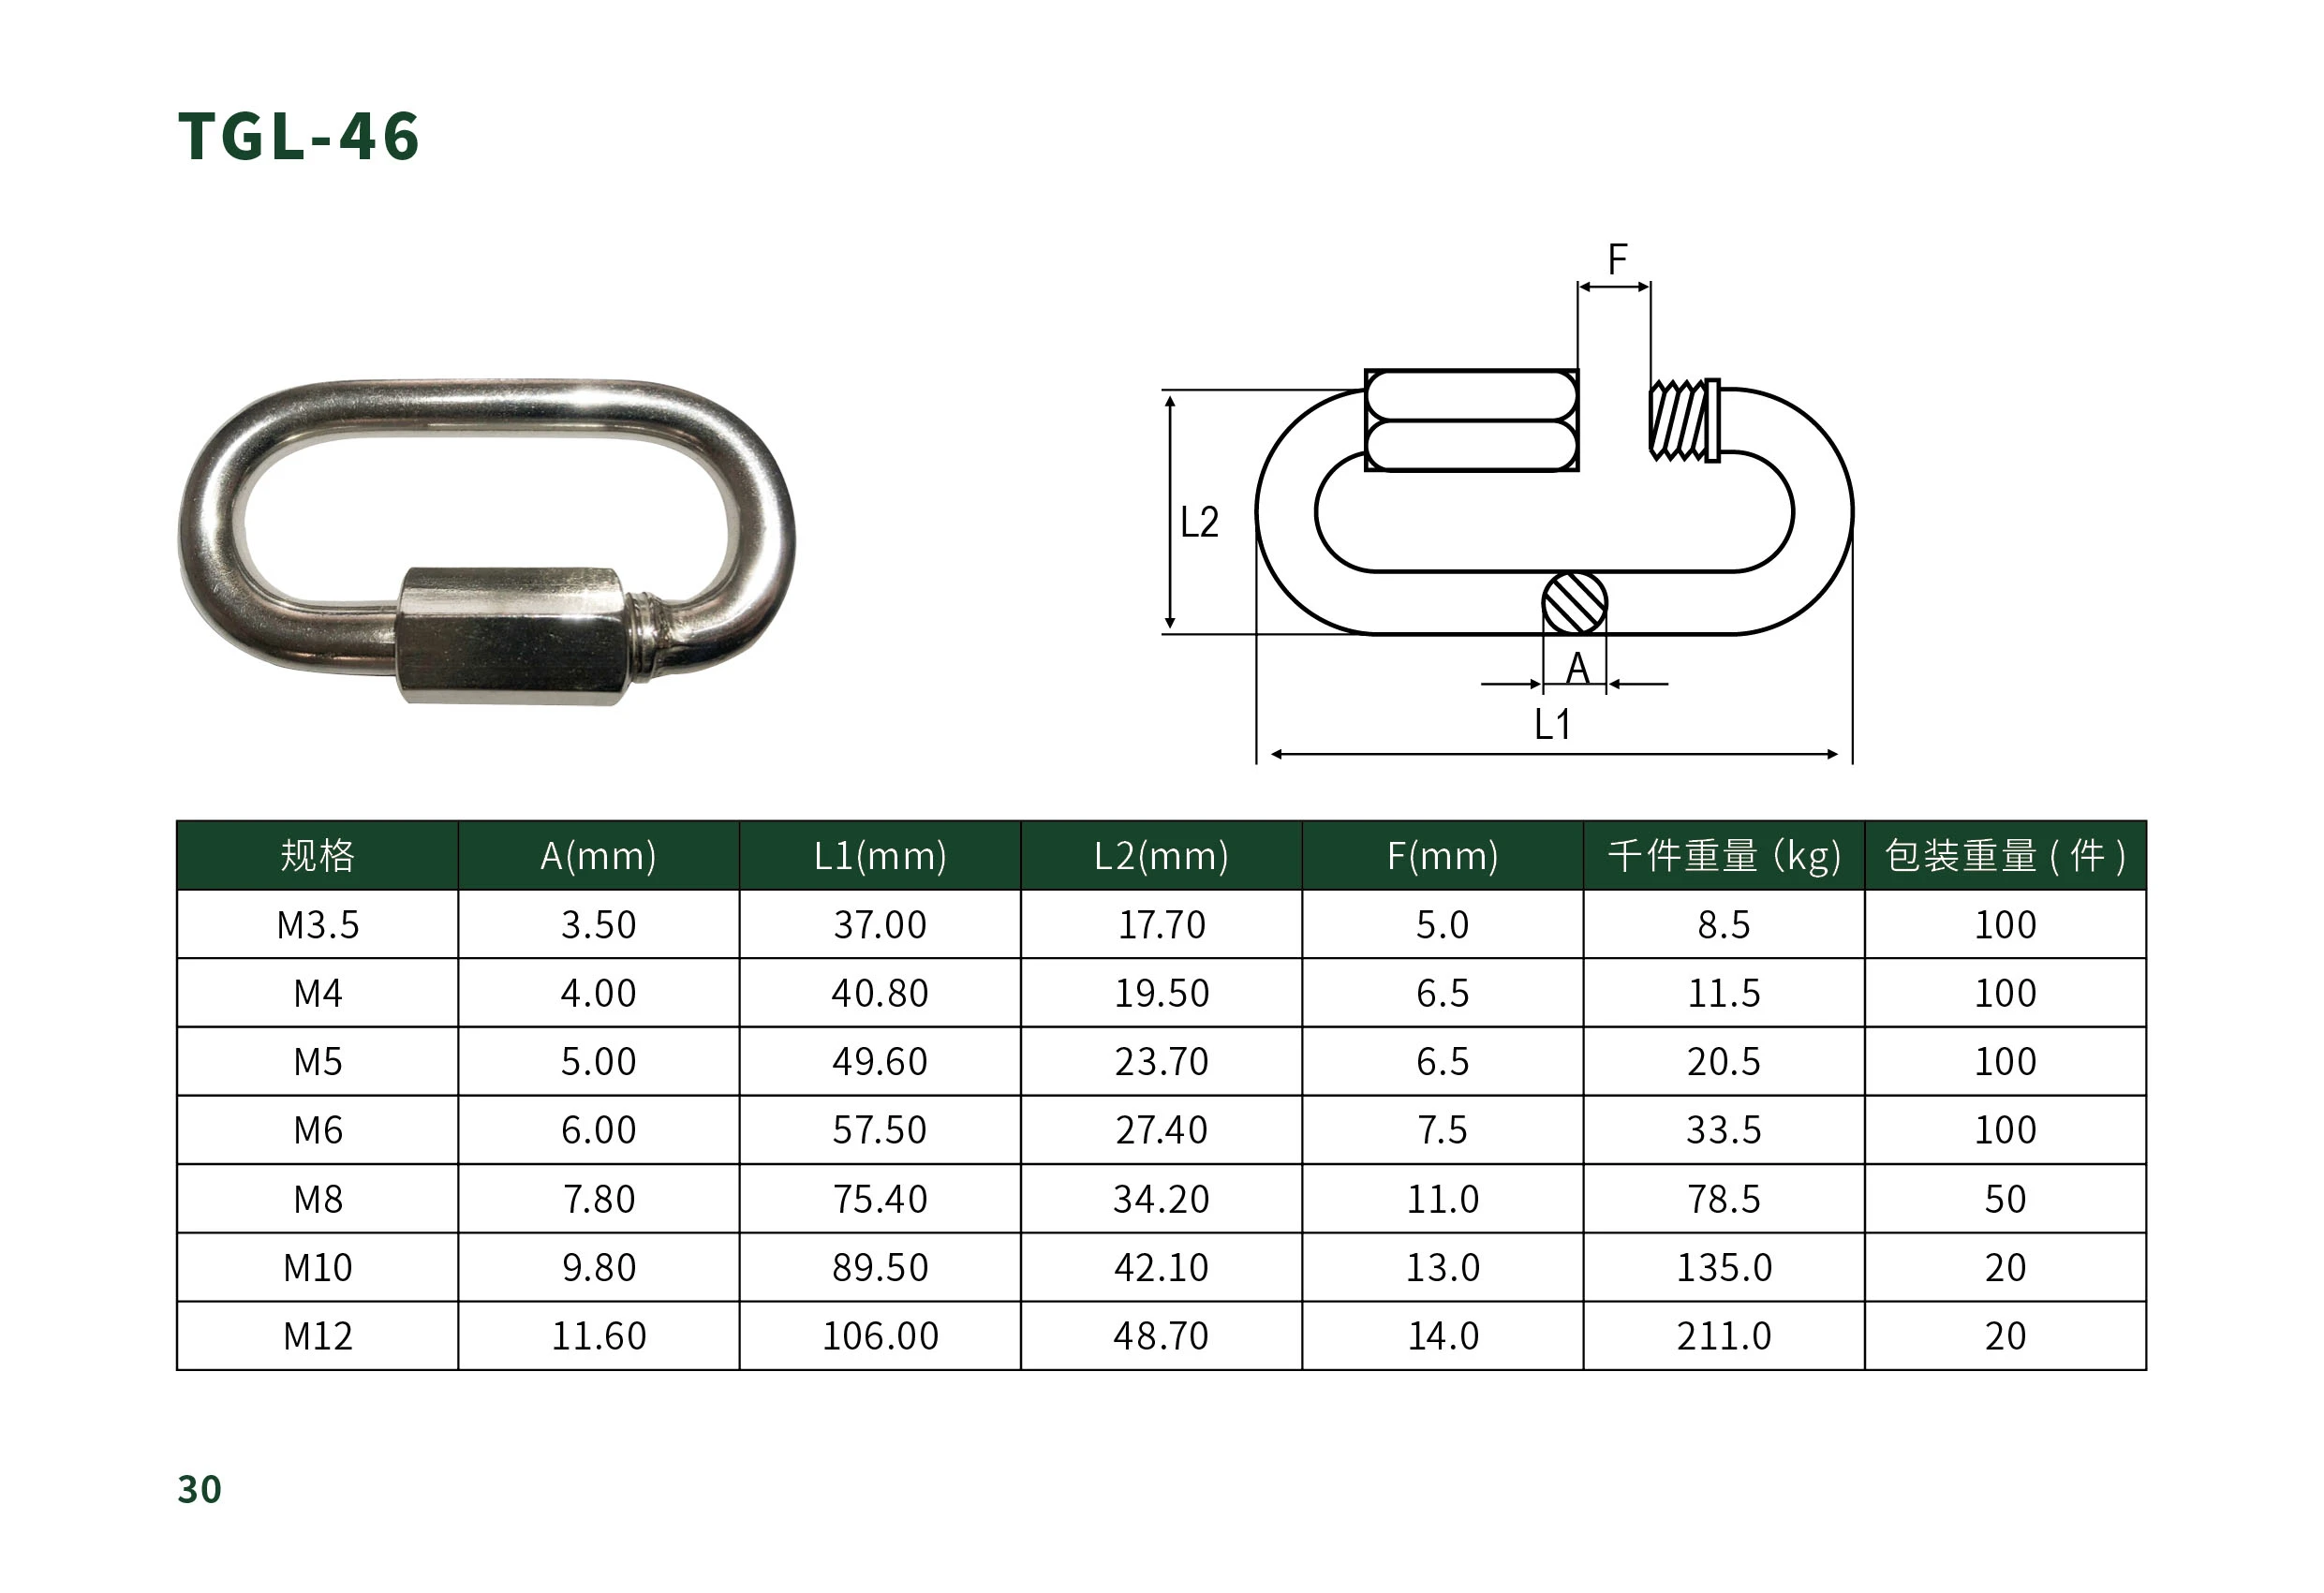 M4 Stainless steel quick link for lifting Adjustable Screw Locked